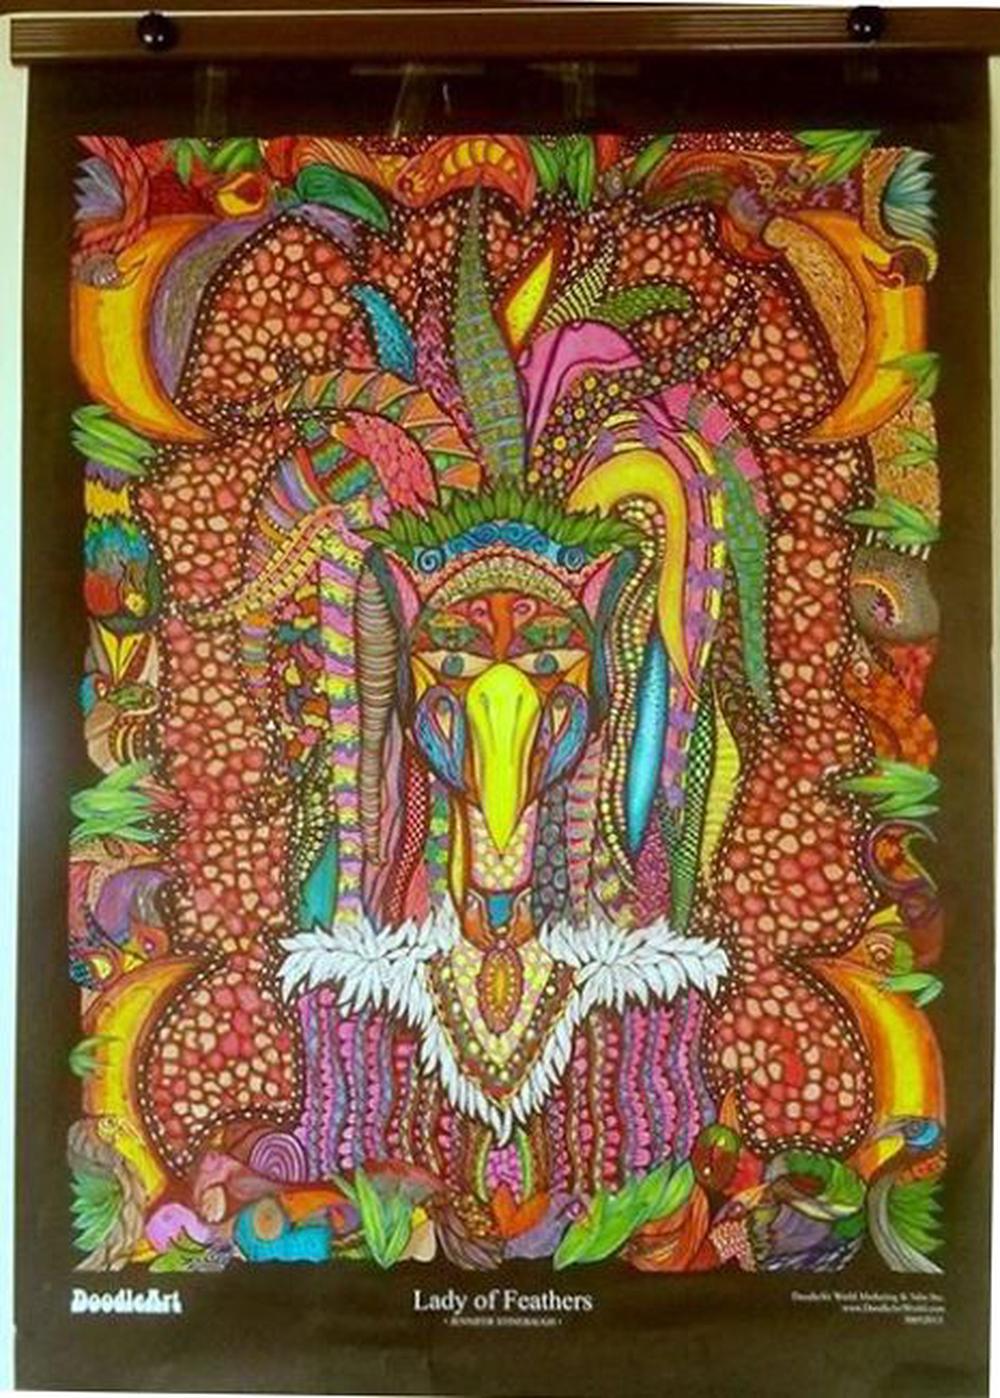 DoodleArt Lady Of Feathers Poster Buy Online At The Nile